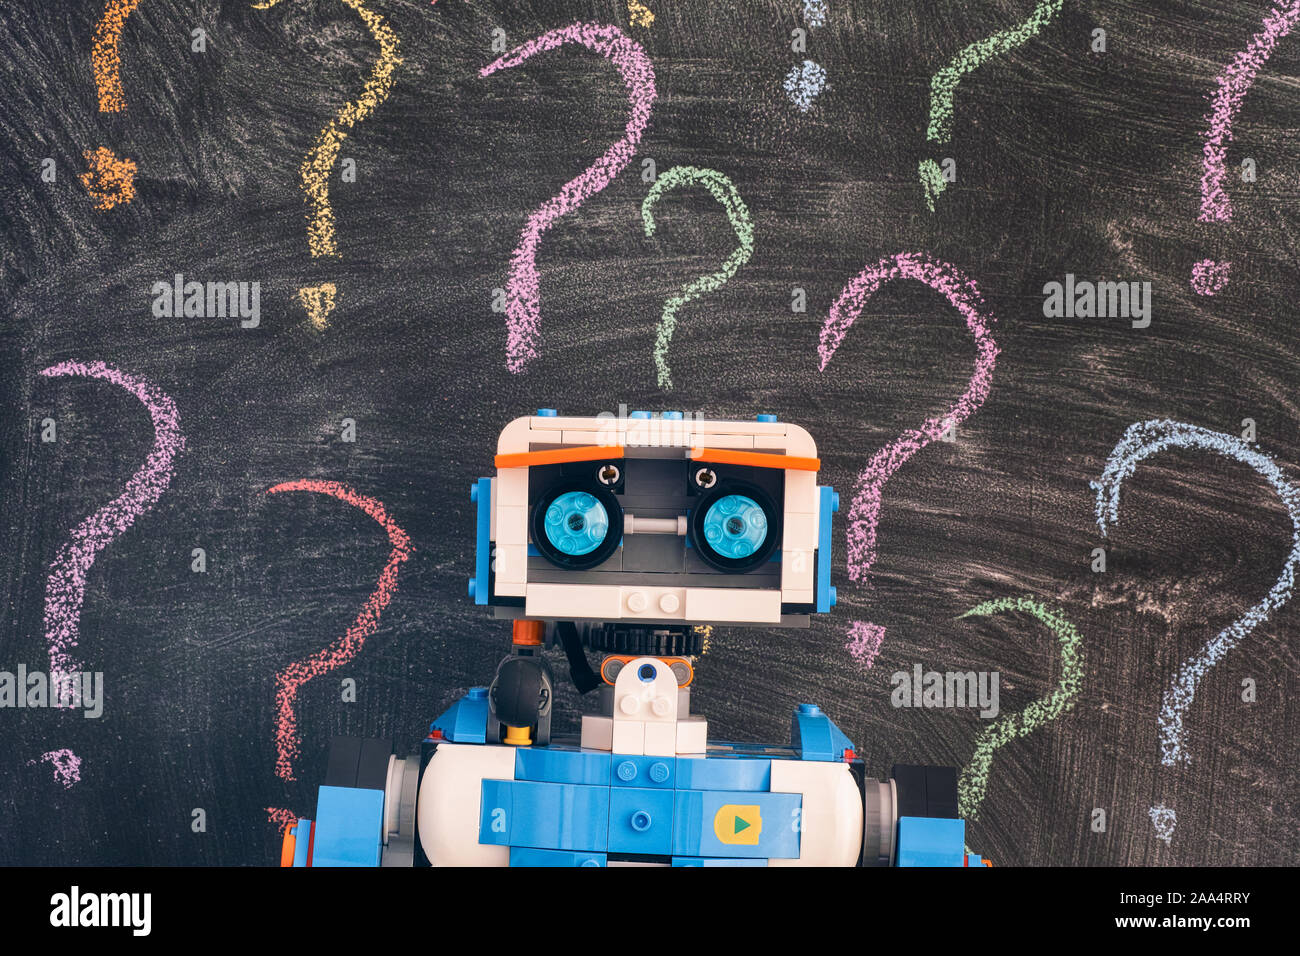 Tambov, Russian Federation - November 15, 2019 Lego Boost Vernie the Robot standing against blackboard with colorful question marks. Stock Photo